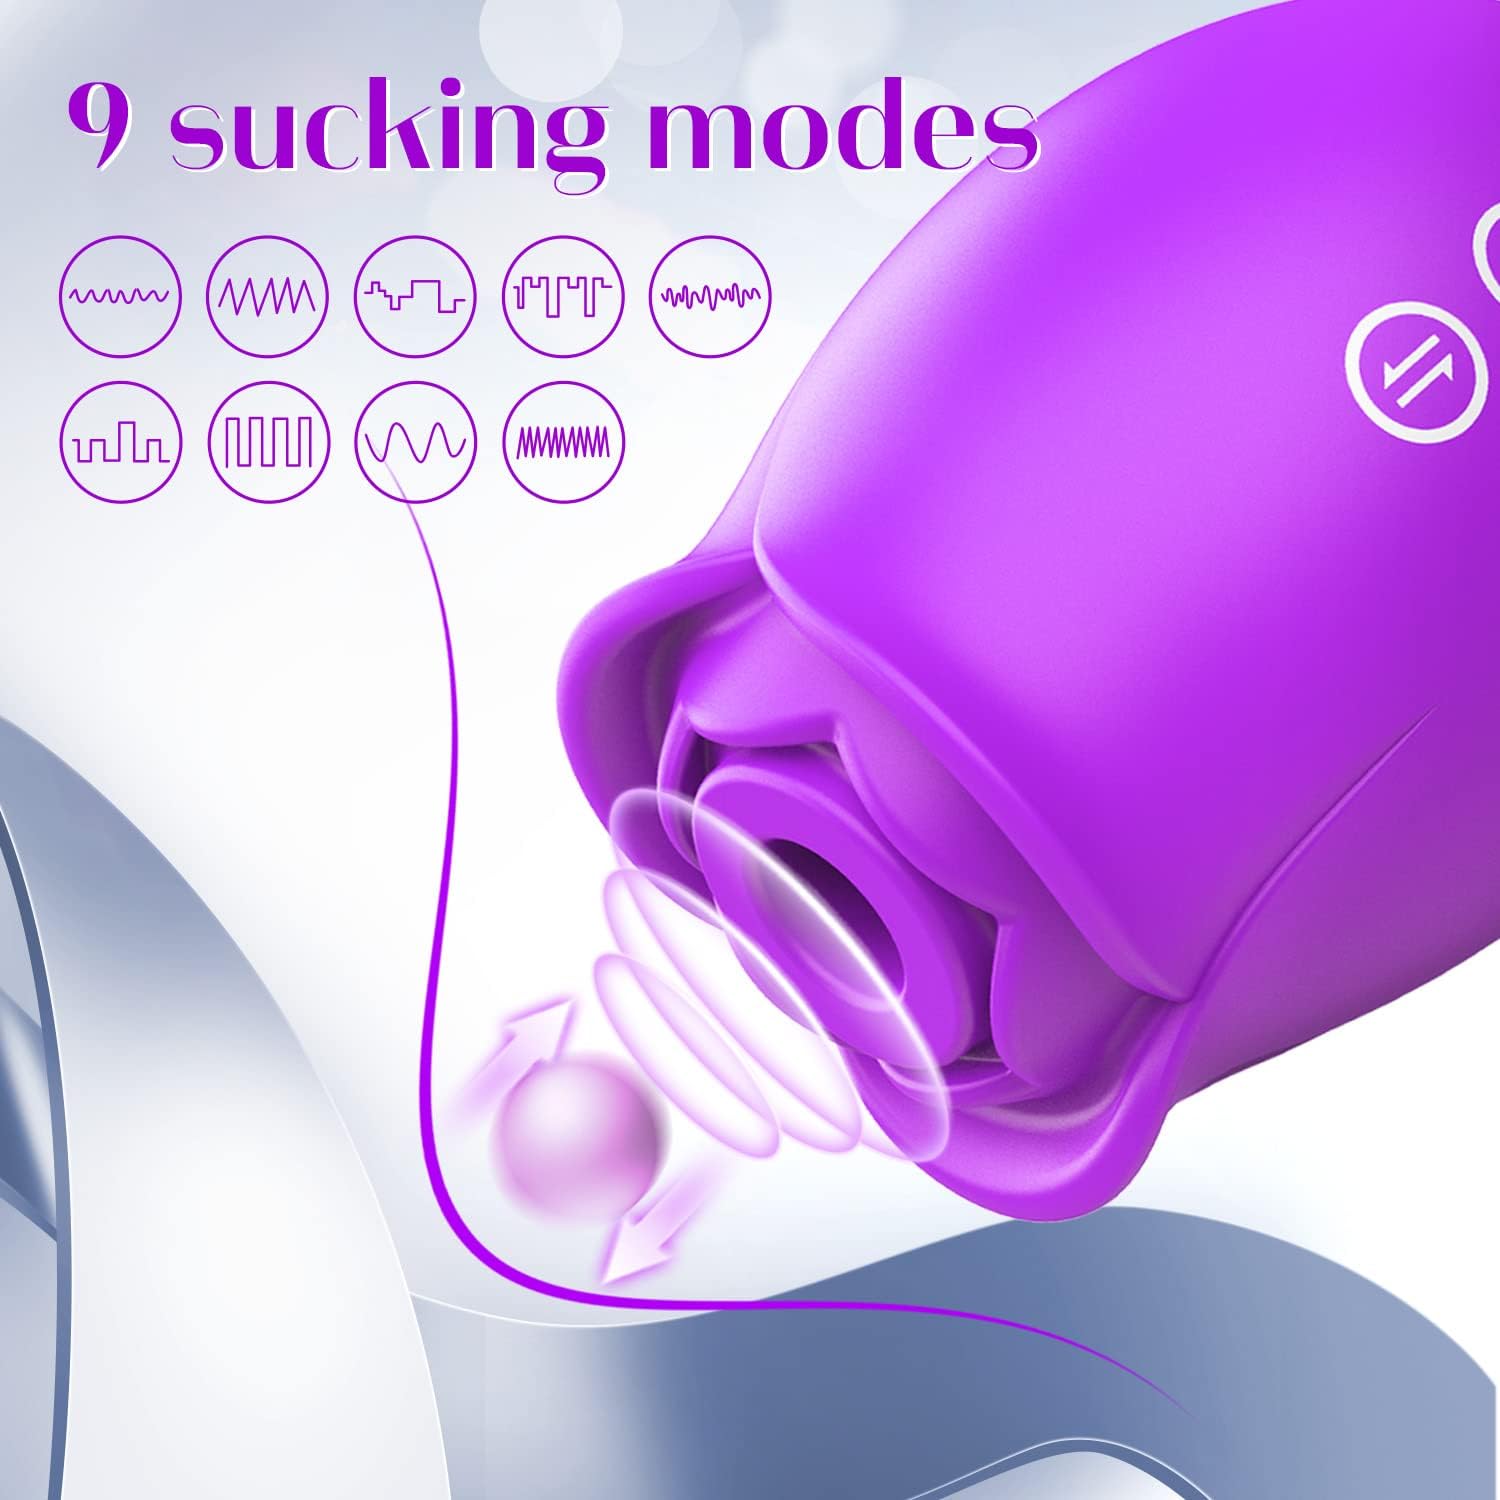 Rose Sex Toy Adult Toys - Rose Vibrator for Women Sex Toys with 9 Sucking Modes, G Spot Vibrator Adult Sex Toys, Toys for Women's Sex Rose Vibrators Sucker Womens Sex Toys for Woman Female